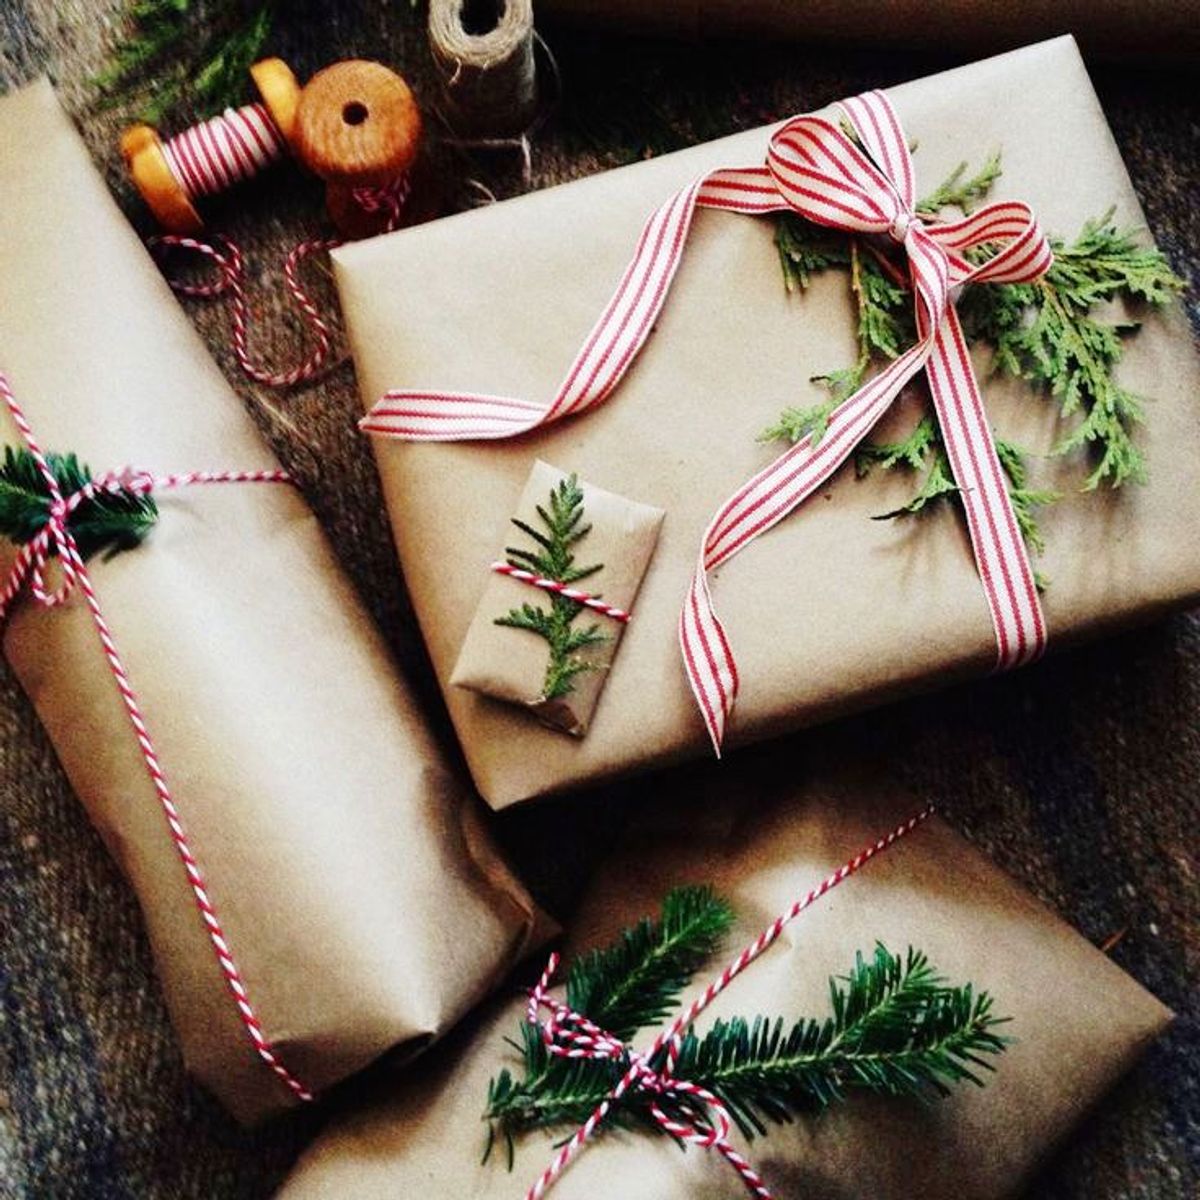 Gift Guide: Thoughtful Gifts On A Budget